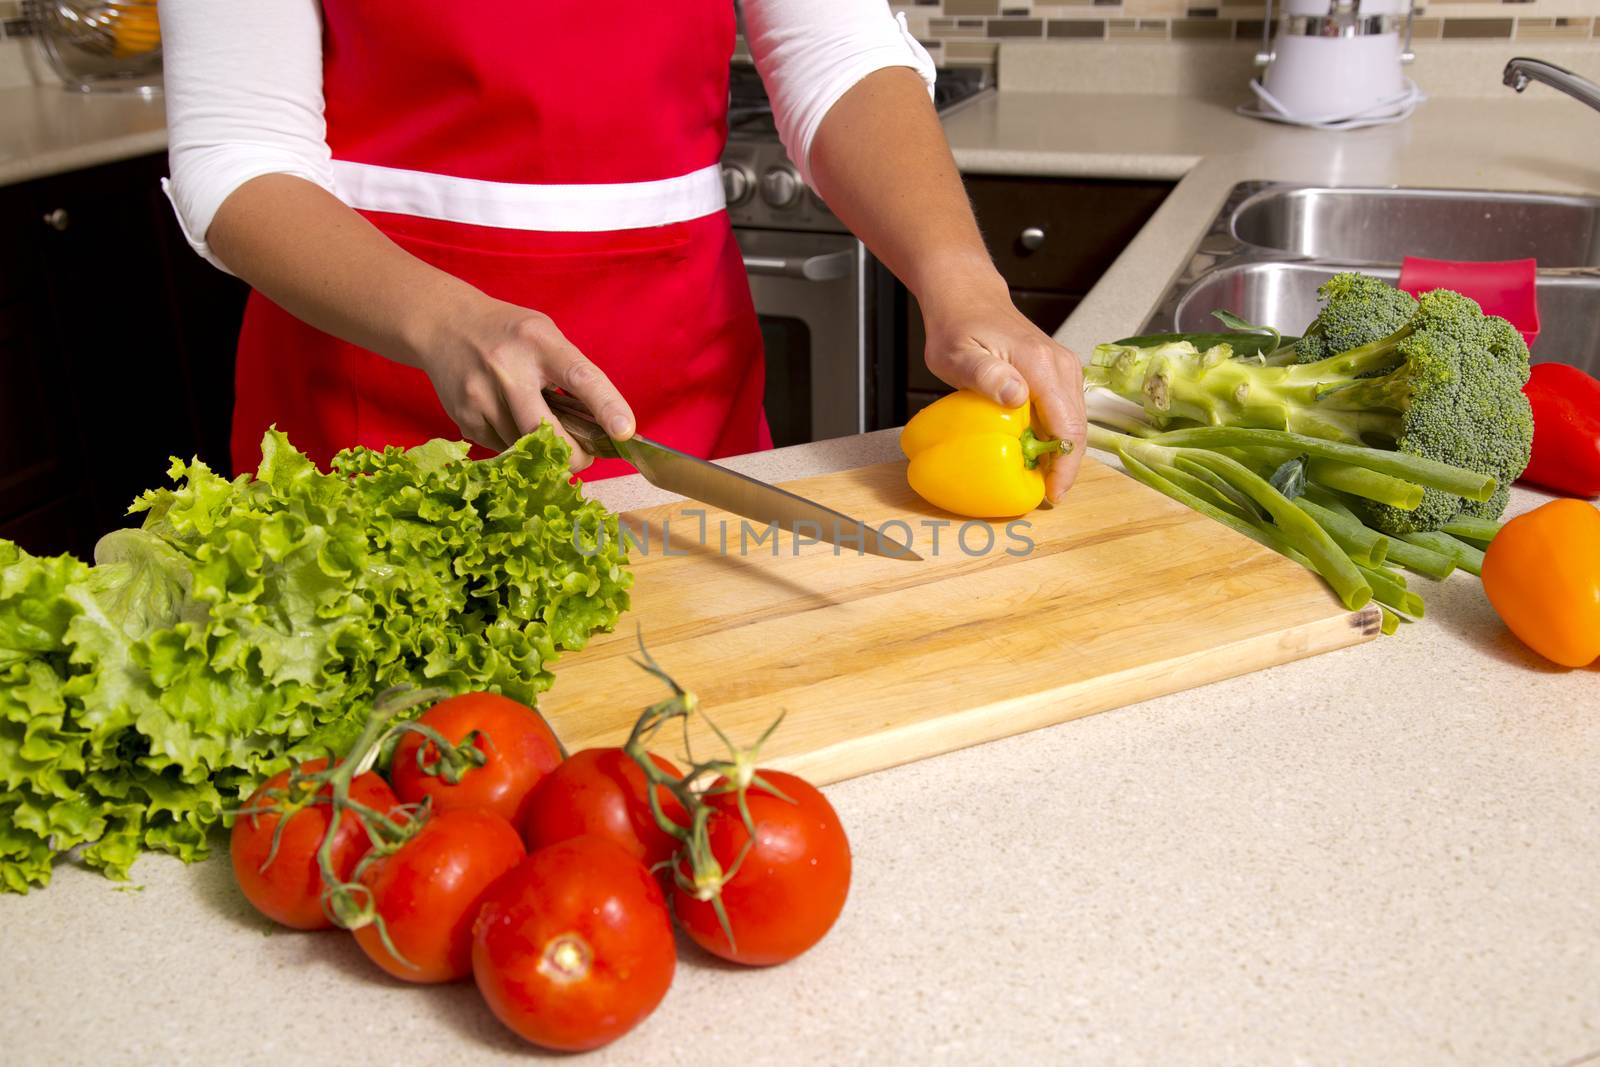 caucasian woman about to cut raw vegetables  on the kitchen